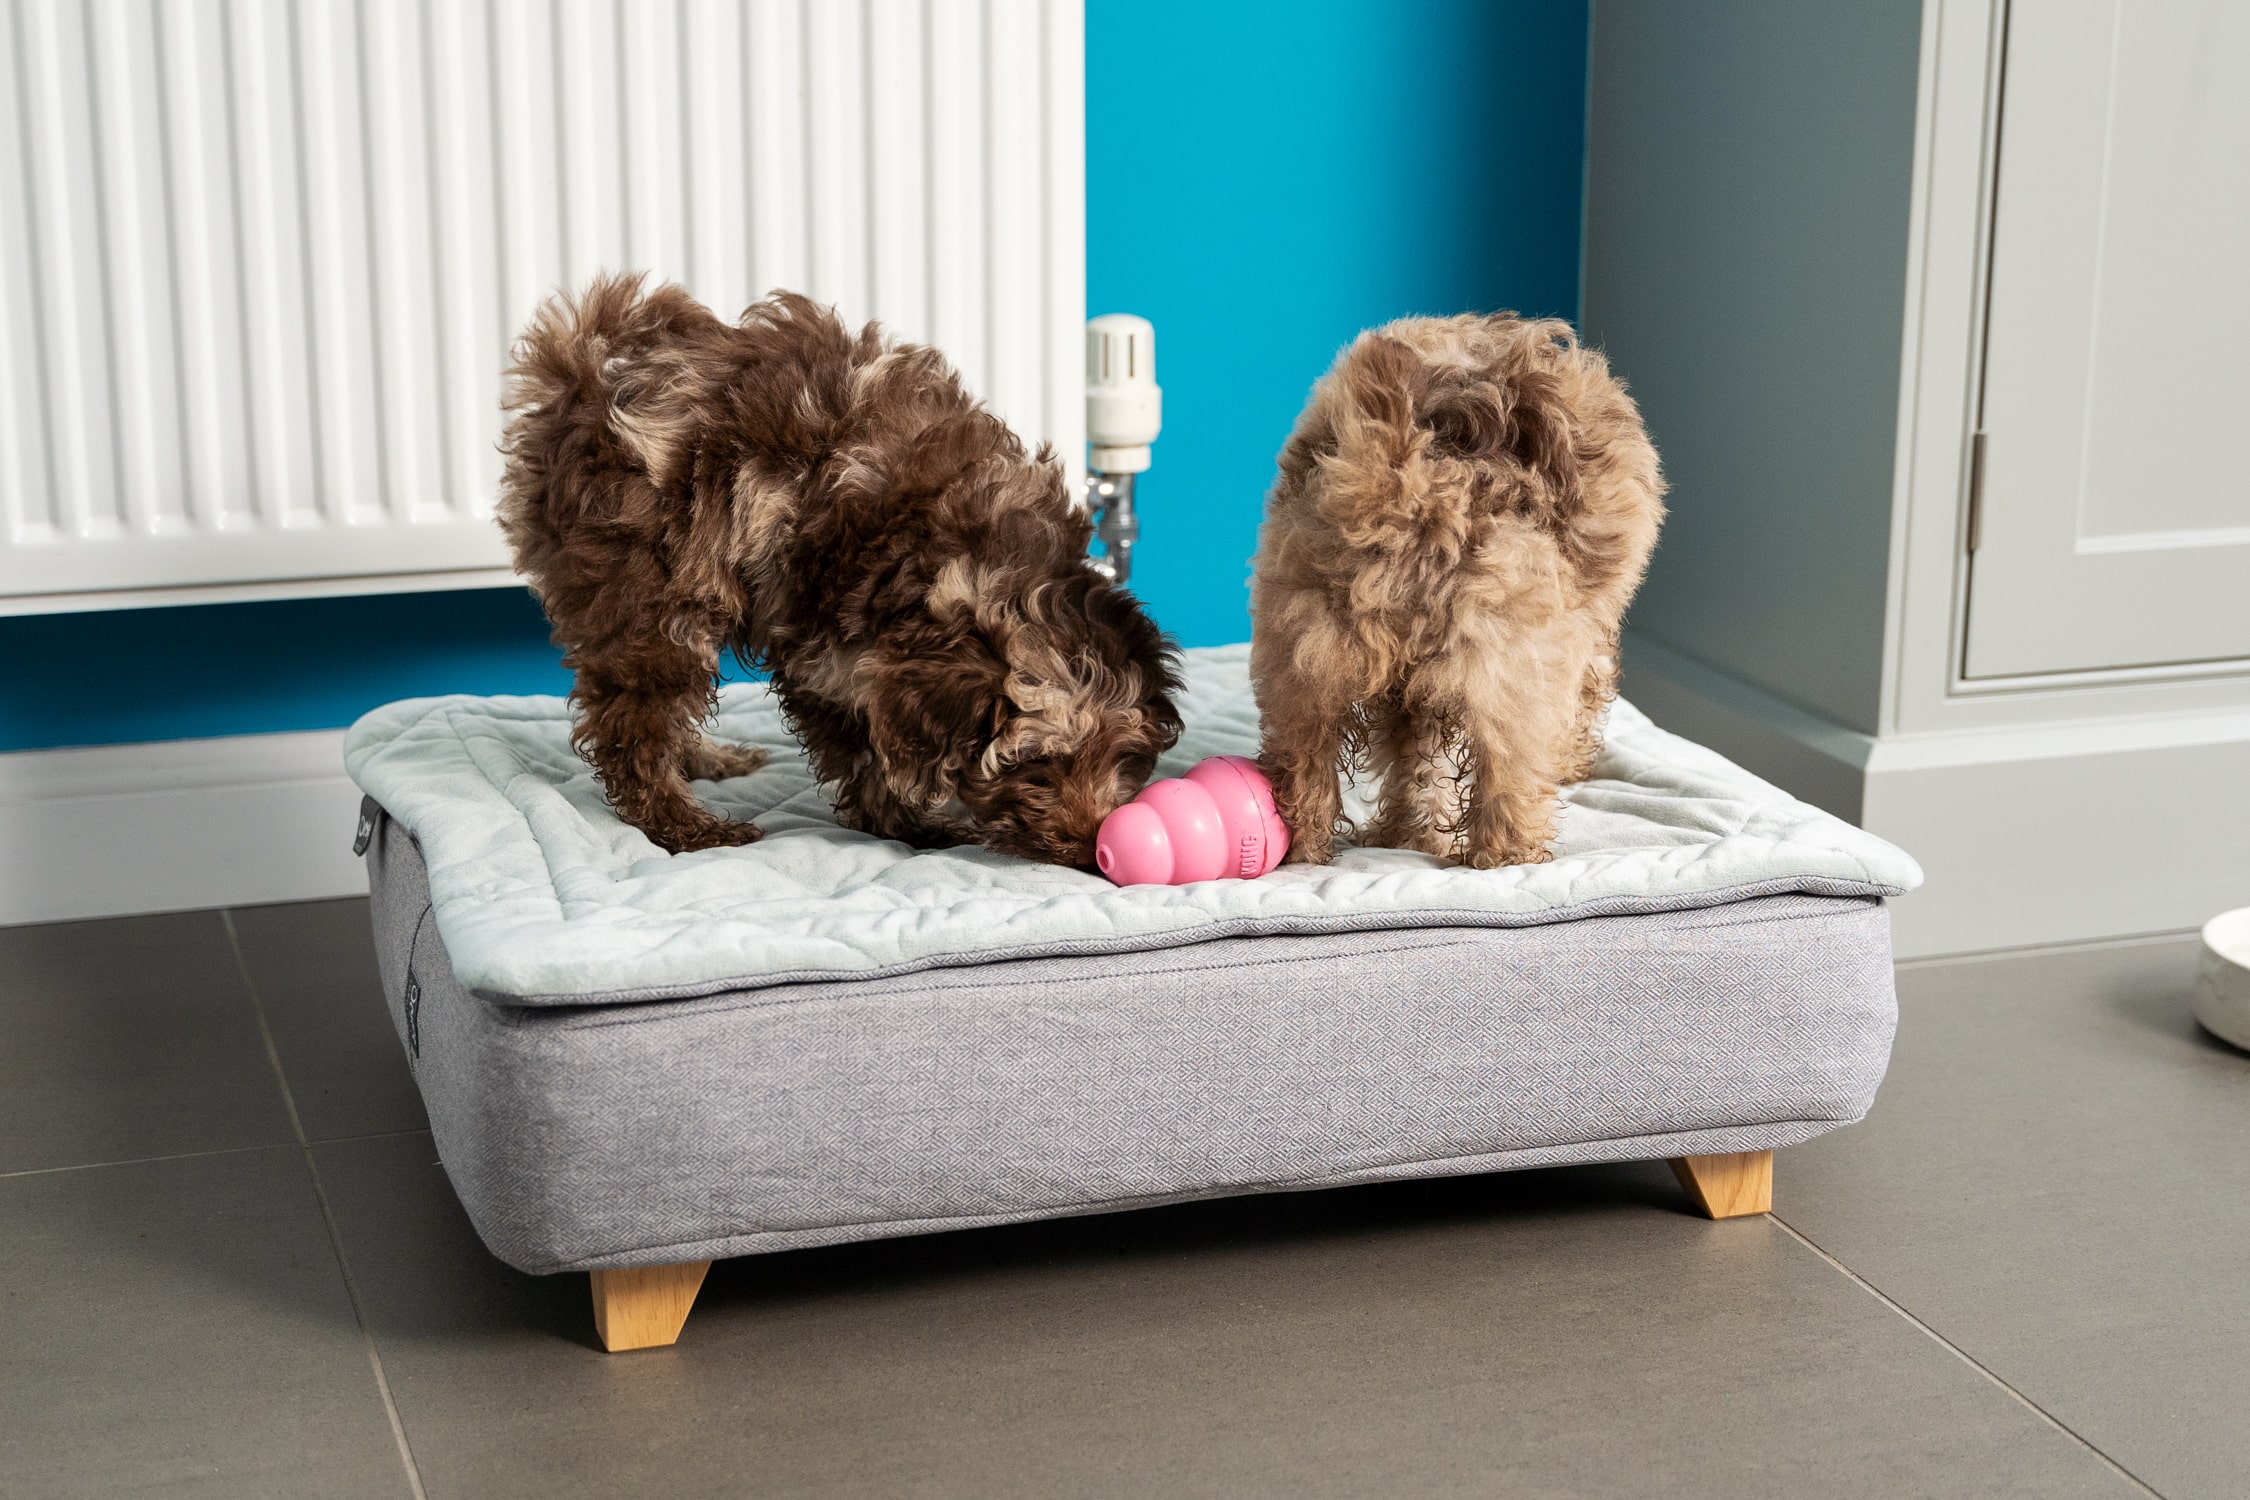 Two young puppies playing on their Omlet Topology puppy bed